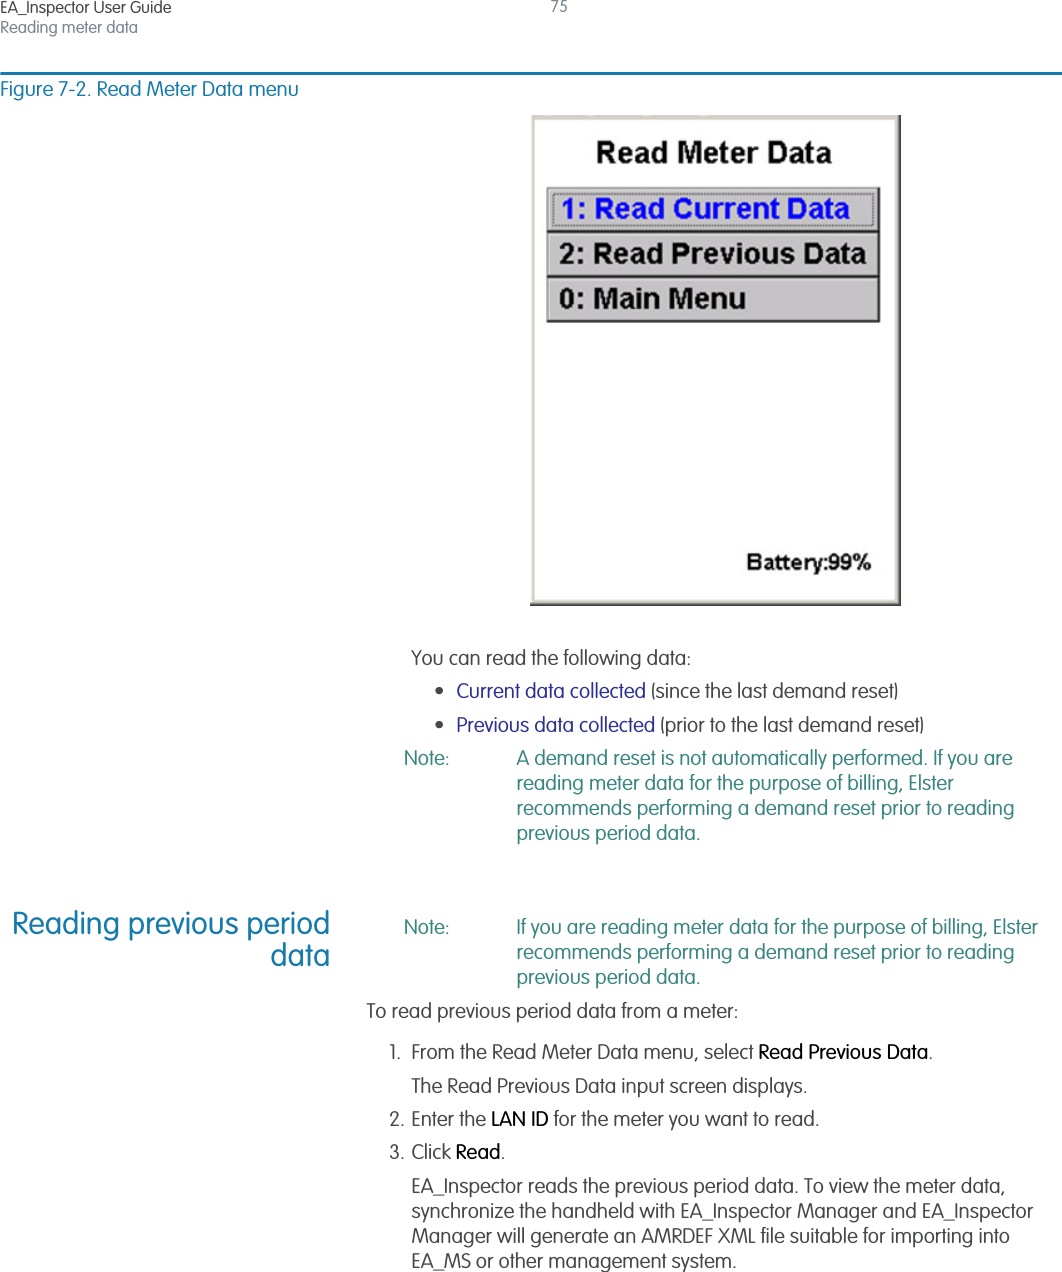 EA_Inspector User GuideReading meter data75Figure 7-2. Read Meter Data menuYou can read the following data:•Current data collected (since the last demand reset)•Previous data collected (prior to the last demand reset)Note: A demand reset is not automatically performed. If you are reading meter data for the purpose of billing, Elster recommends performing a demand reset prior to reading previous period data.Reading previous perioddataNote: If you are reading meter data for the purpose of billing, Elster recommends performing a demand reset prior to reading previous period data.To read previous period data from a meter:1. From the Read Meter Data menu, select Read Previous Data.The Read Previous Data input screen displays.2. Enter the LAN ID for the meter you want to read.3. Click Read.EA_Inspector reads the previous period data. To view the meter data, synchronize the handheld with EA_Inspector Manager and EA_Inspector Manager will generate an AMRDEF XML file suitable for importing into EA_MS or other management system.